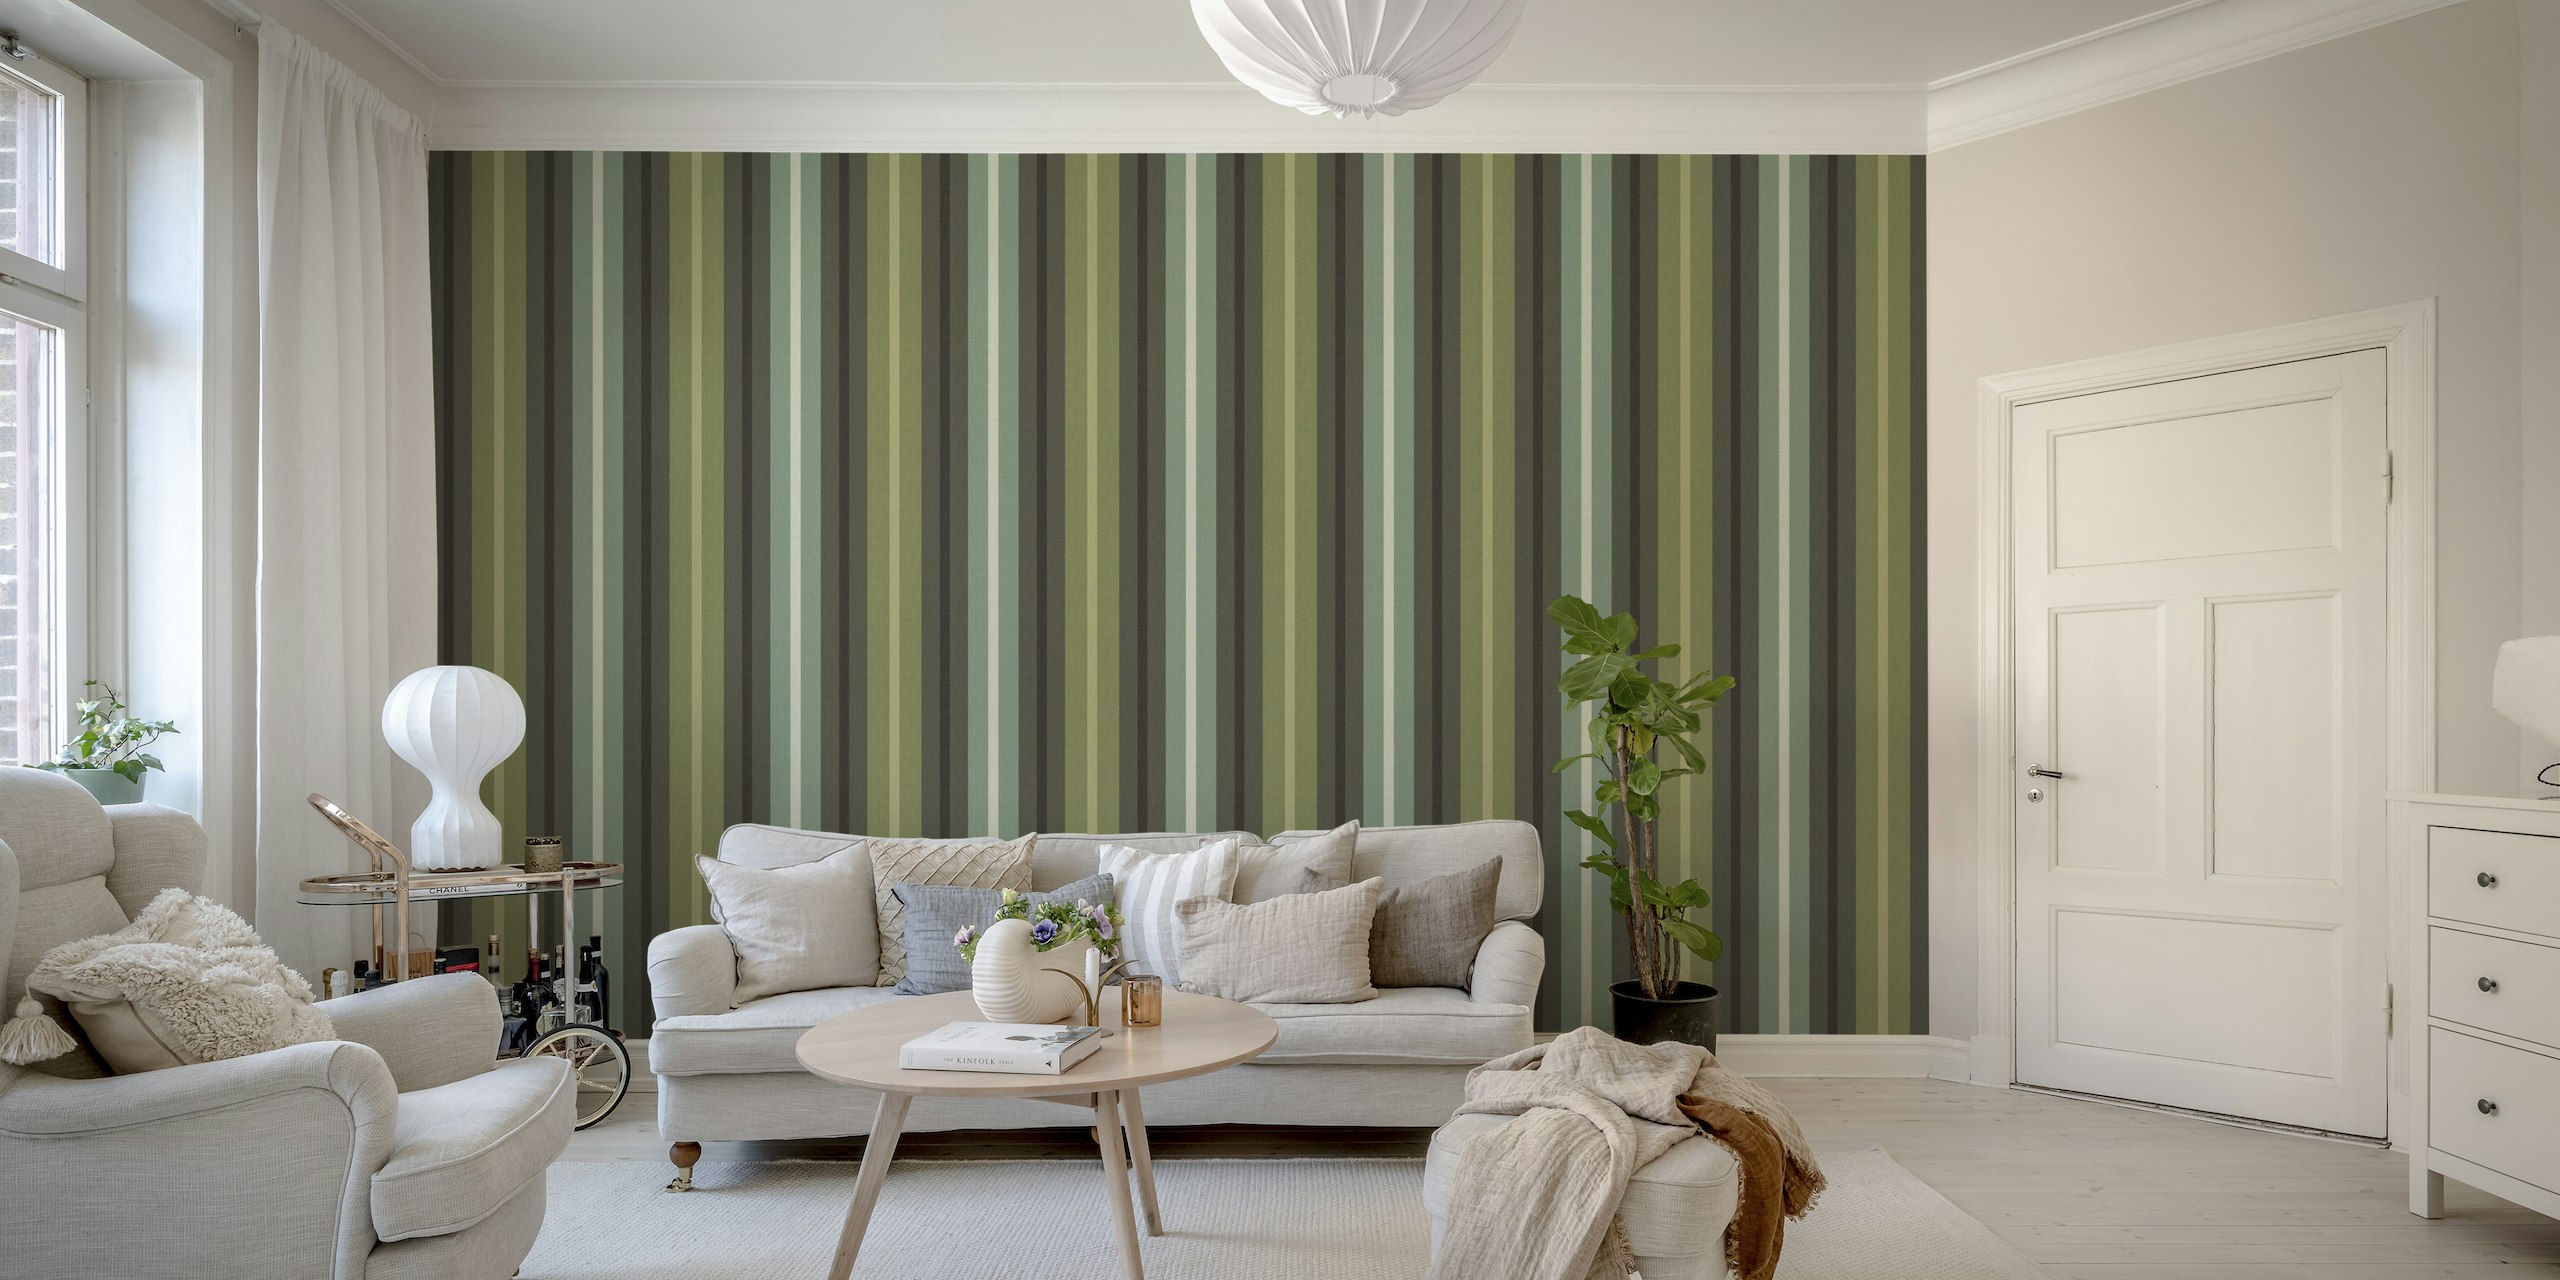 Green burlap textured stripe wall mural with varying shades of green